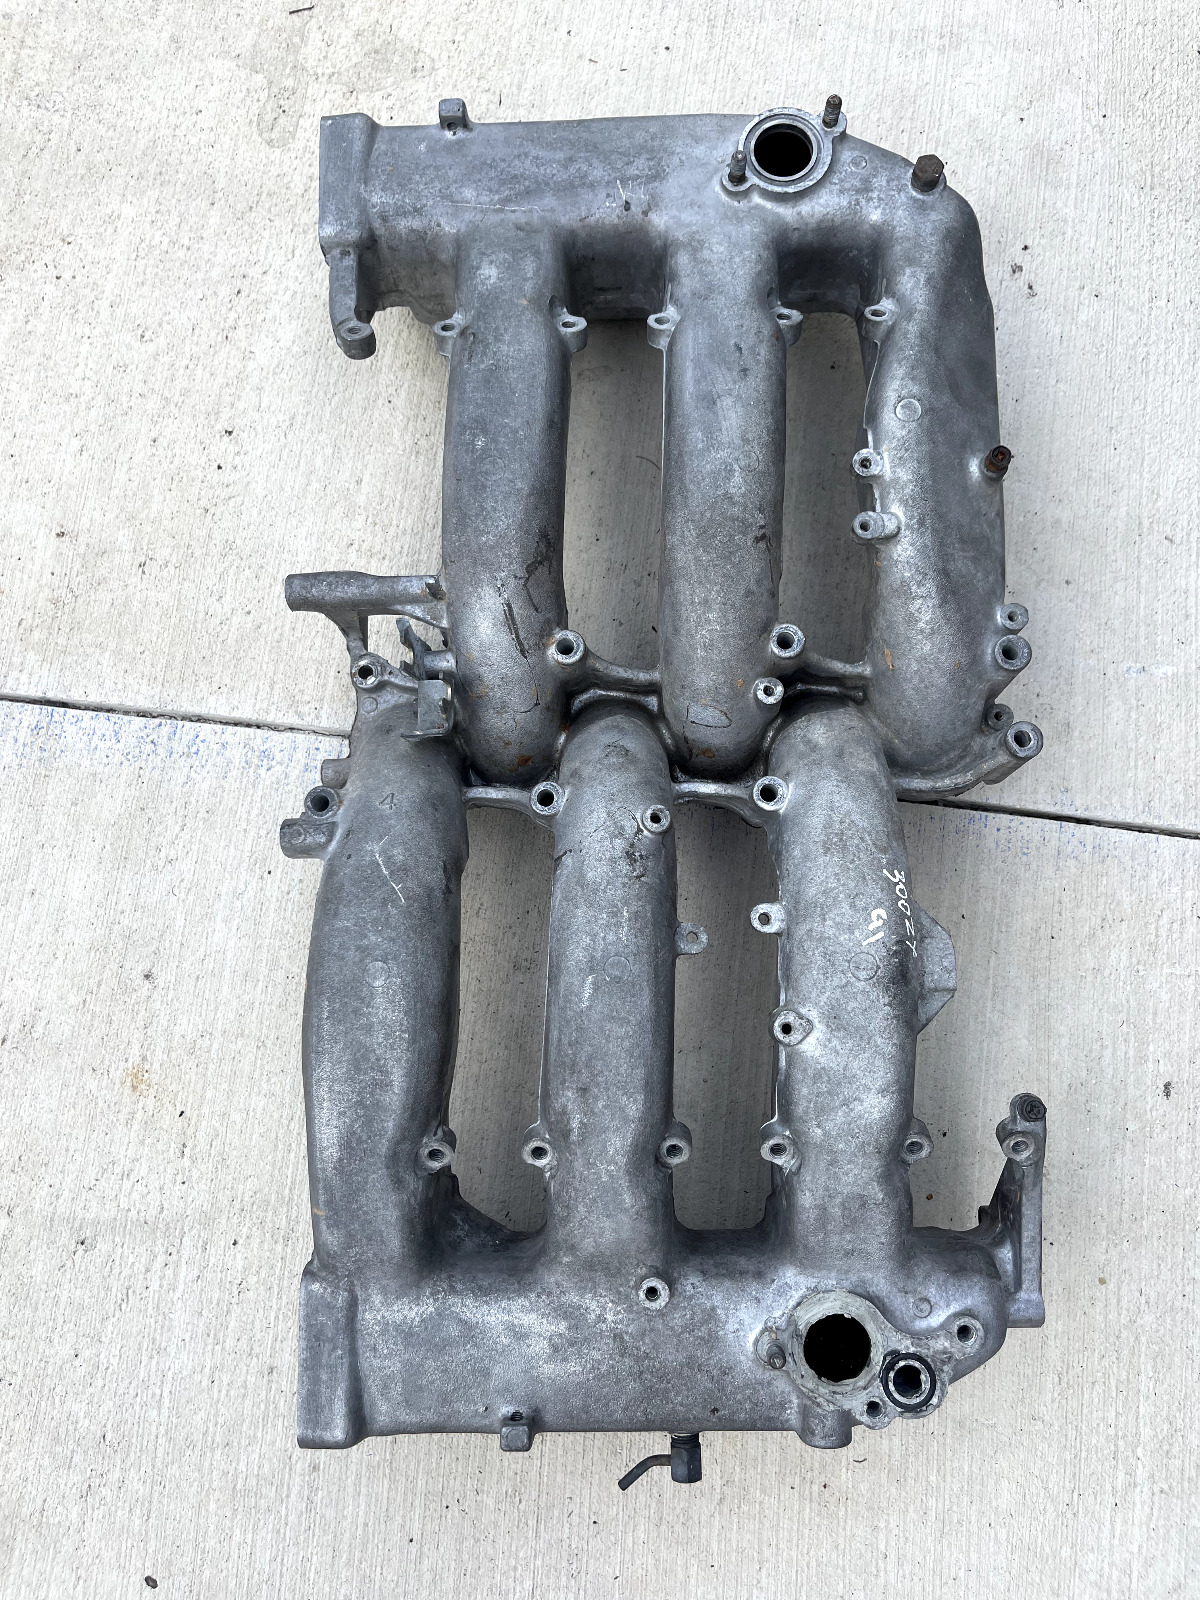 1991 NISSAN 300ZX NON-TURBO ENGINE MOTOR UPPER INTAKE MANIFOLD COLLECTOR OEM